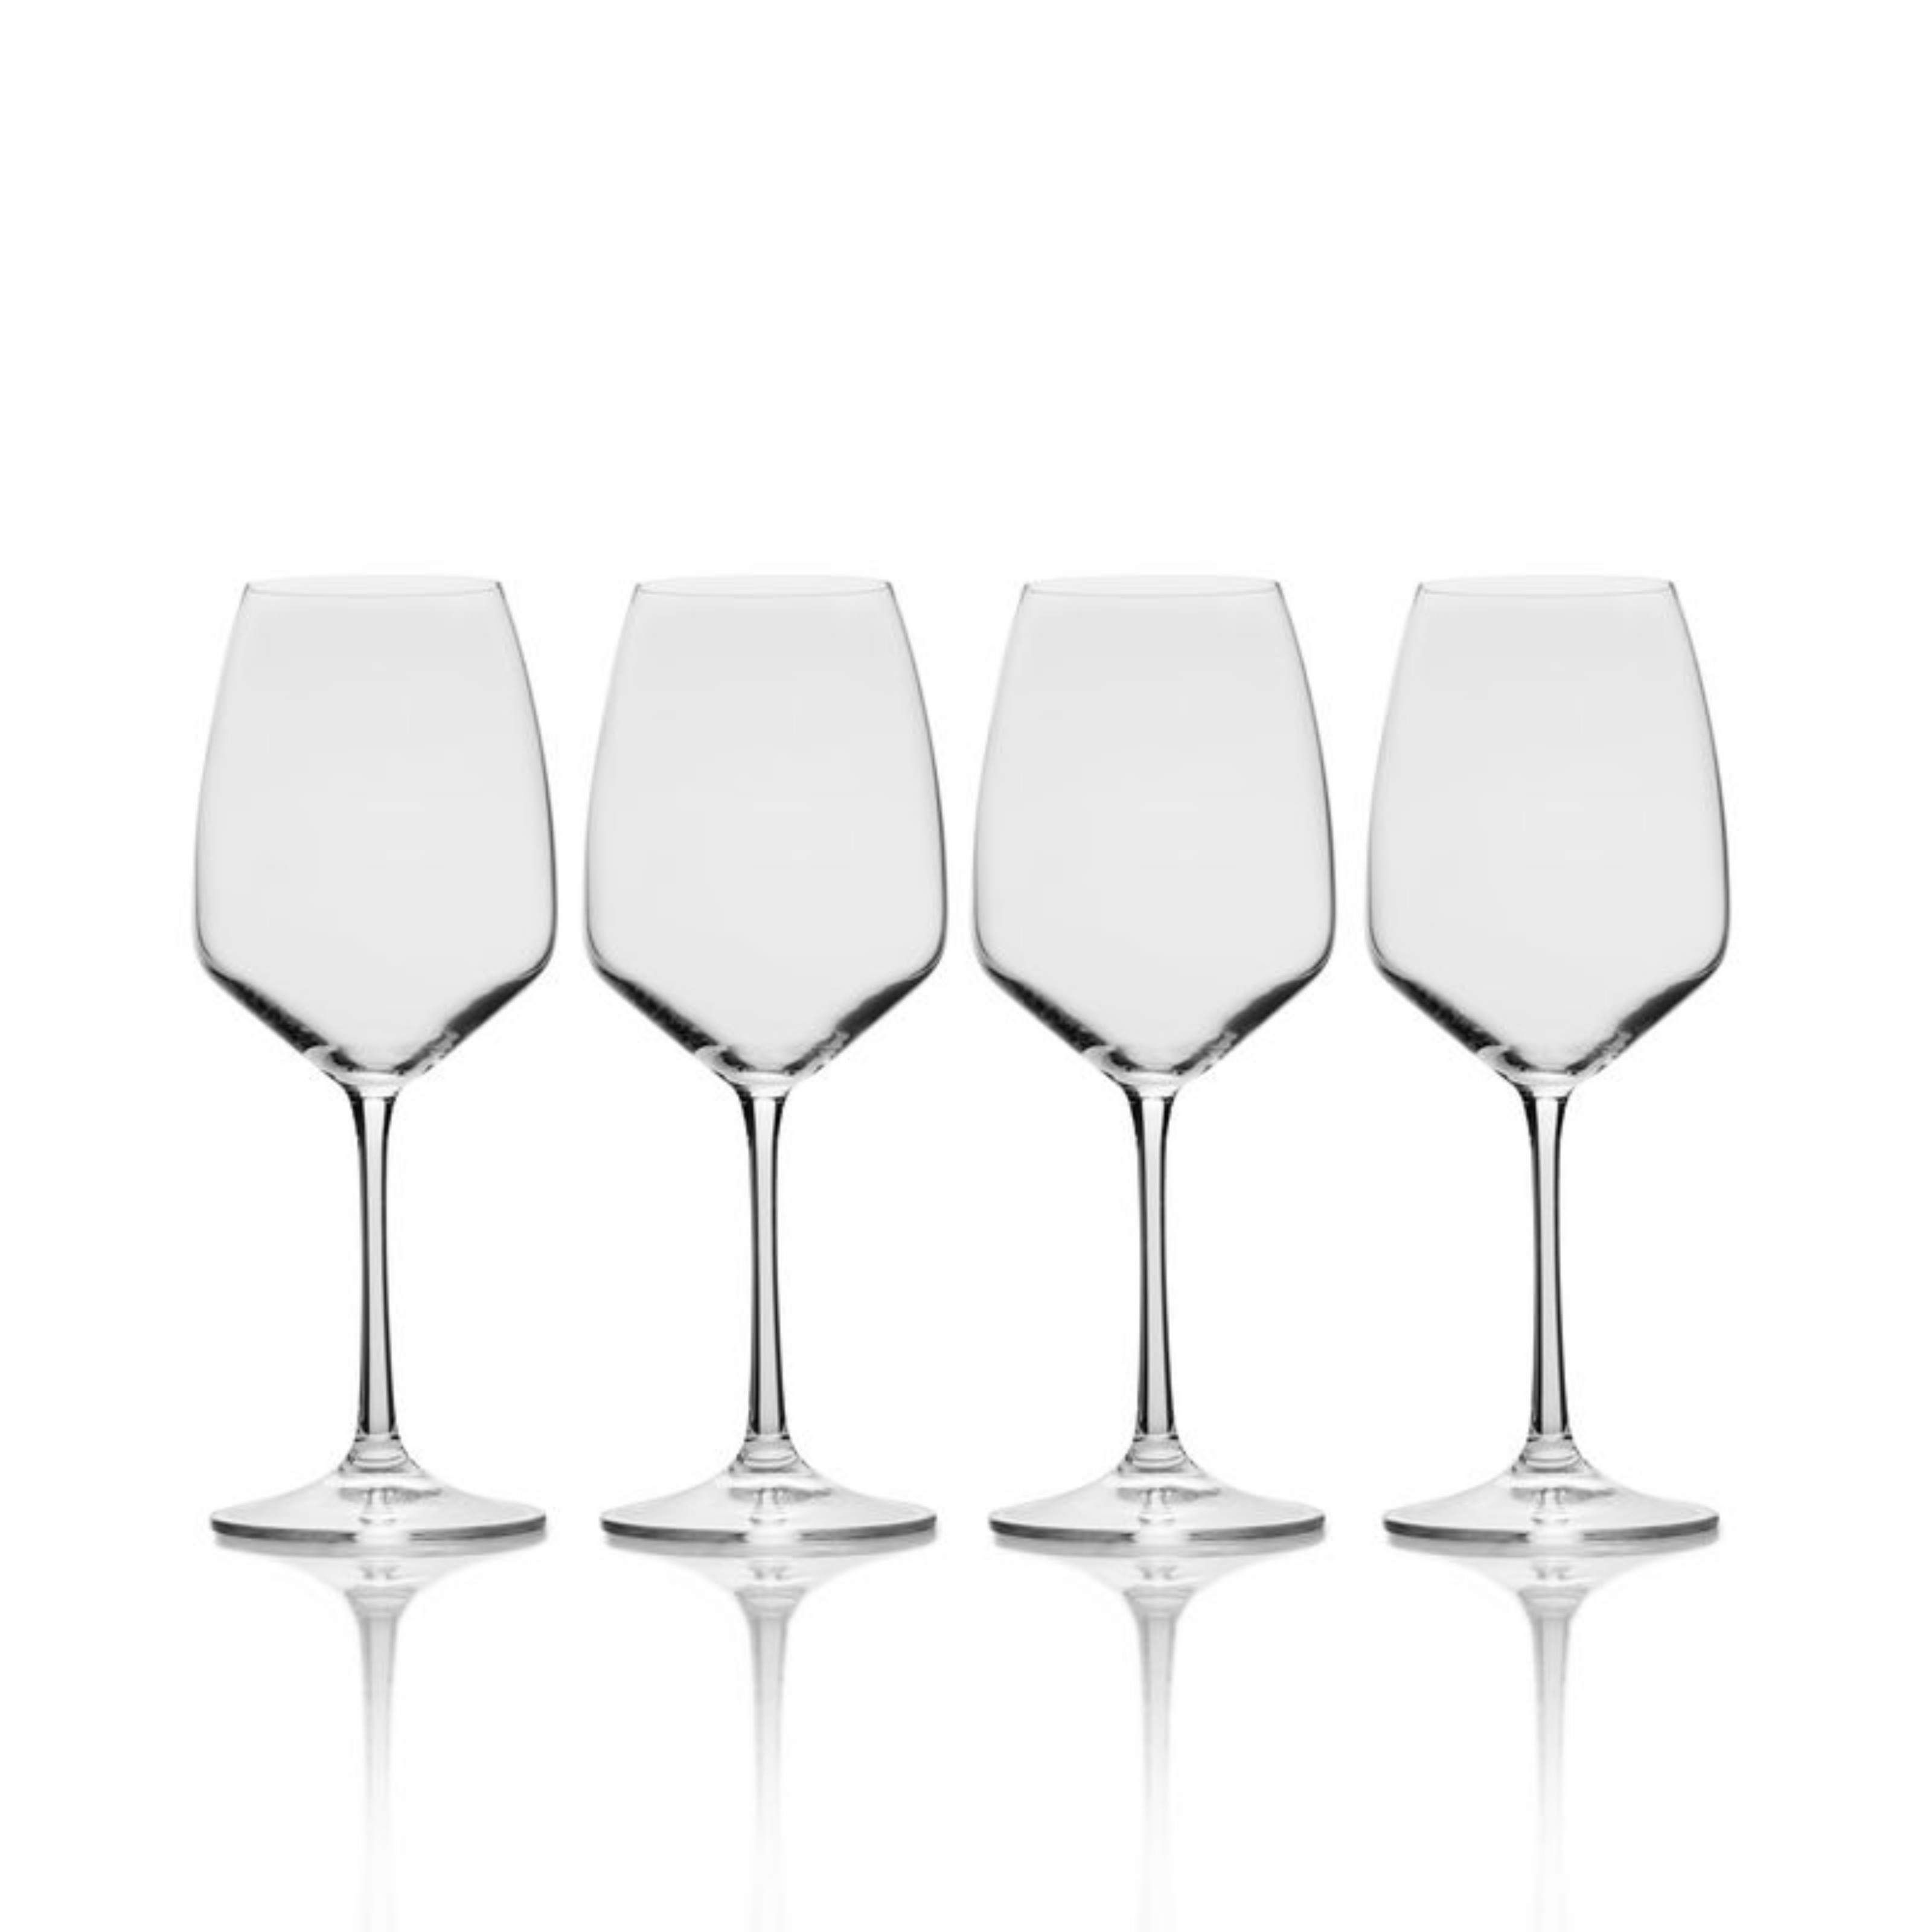 Mikasa Cora 14 oz. Stemless Wine/Double Old-Fashioned Glasses, Set of 4